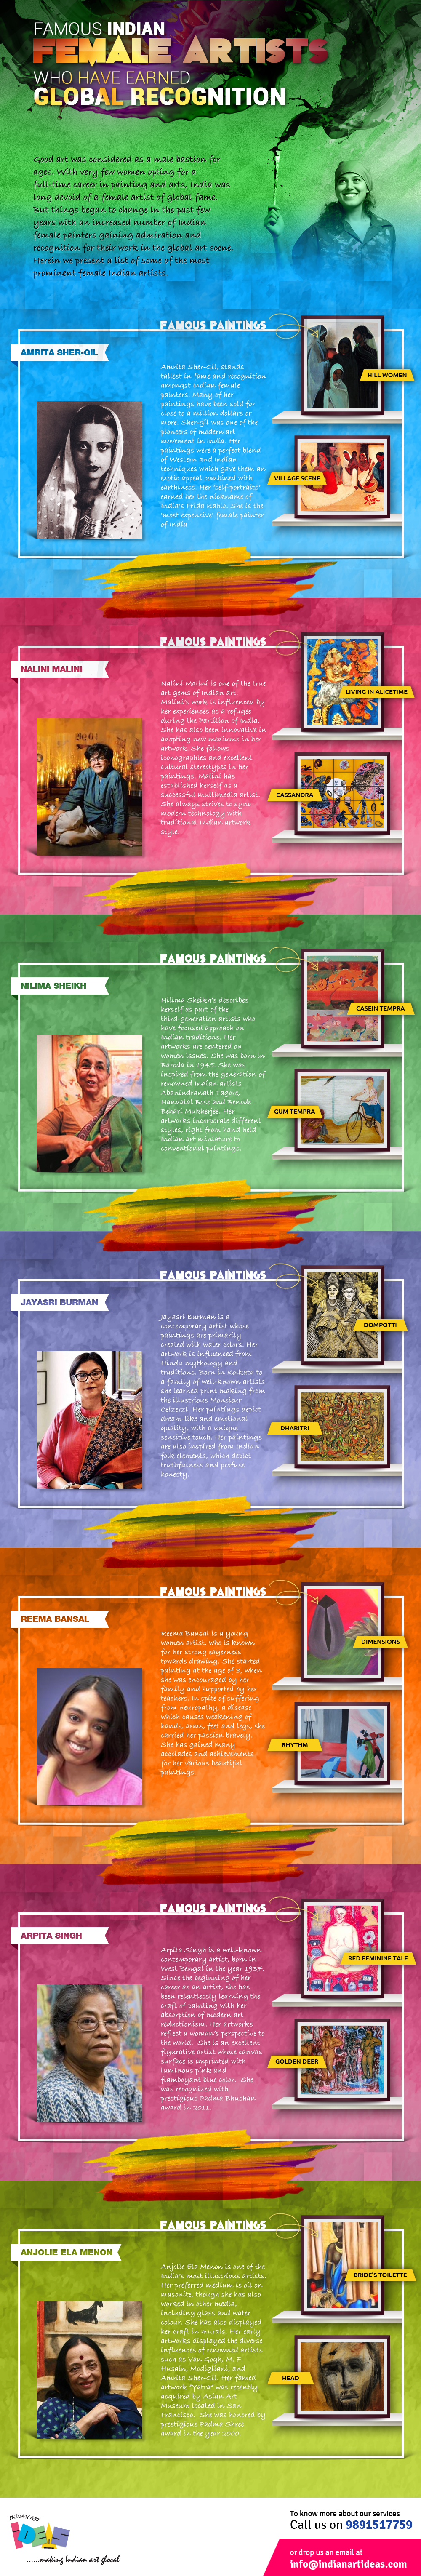 Famous Indian Female Artists Infographic